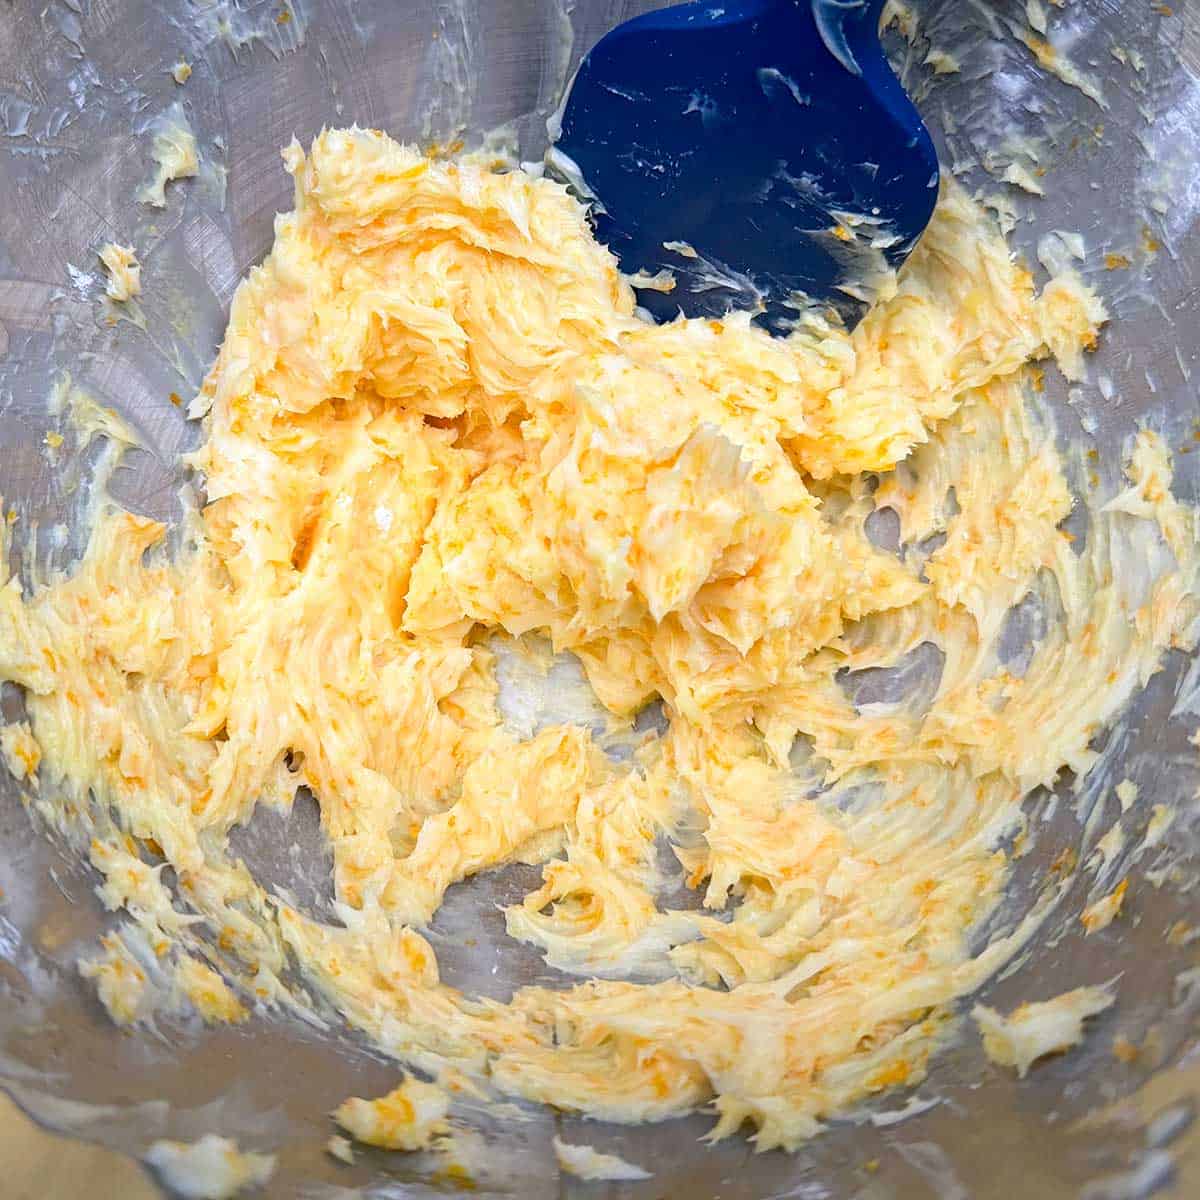 Ginger and orange zest has been added to the cookie dough.